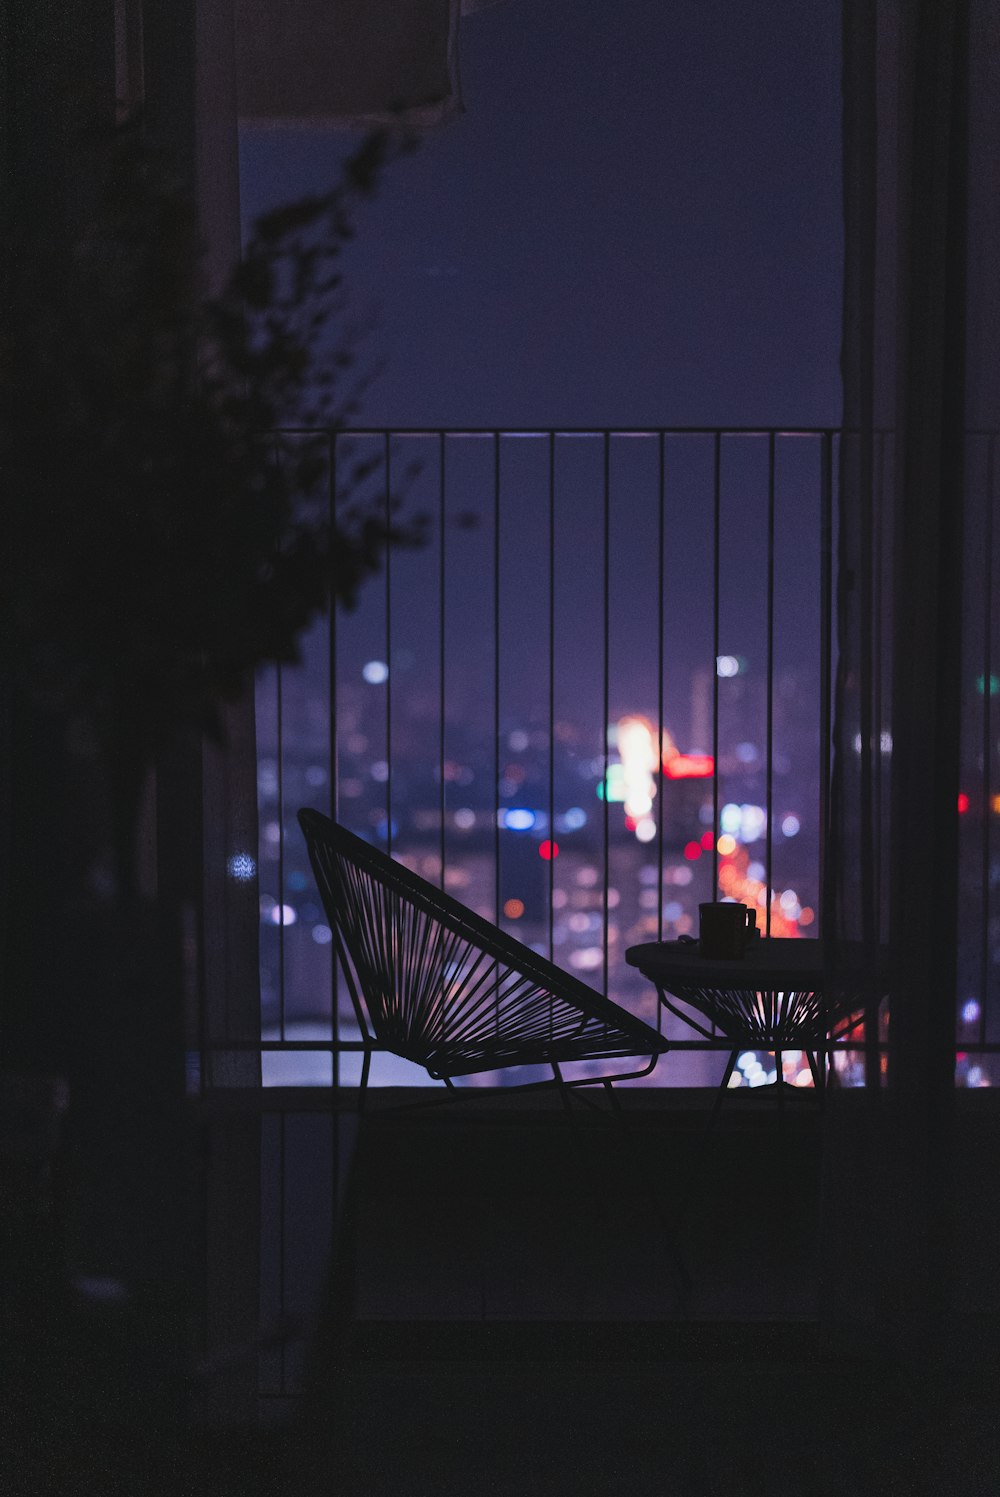 a chair and table on a balcony overlooking a city at night